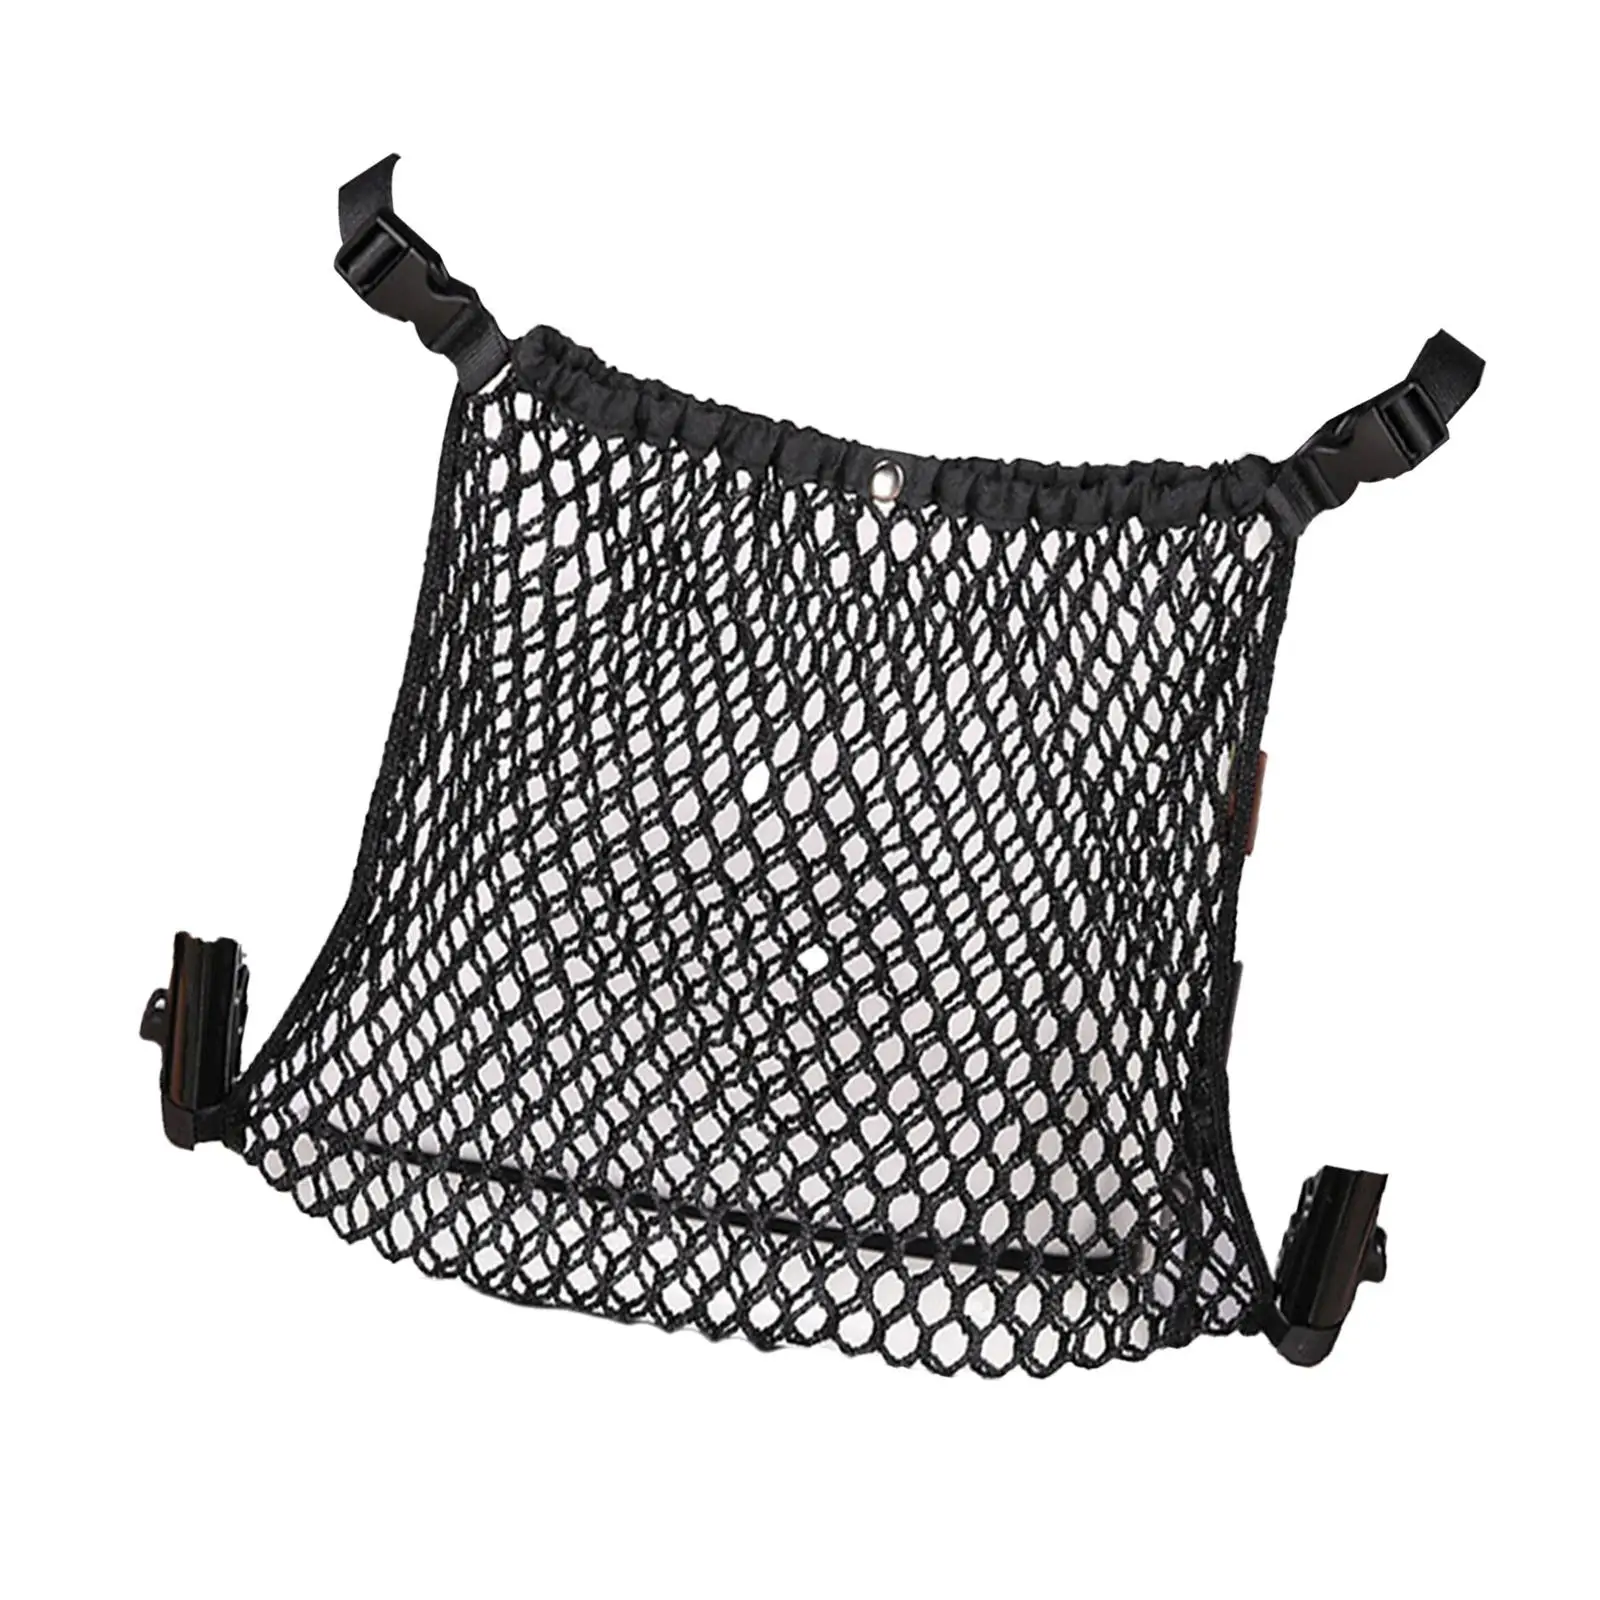 Universal Baby Trolley Mesh Net Pocket Hanging Multi Function Practical Portable Infant Stroller Mesh for Clothes Water Cups